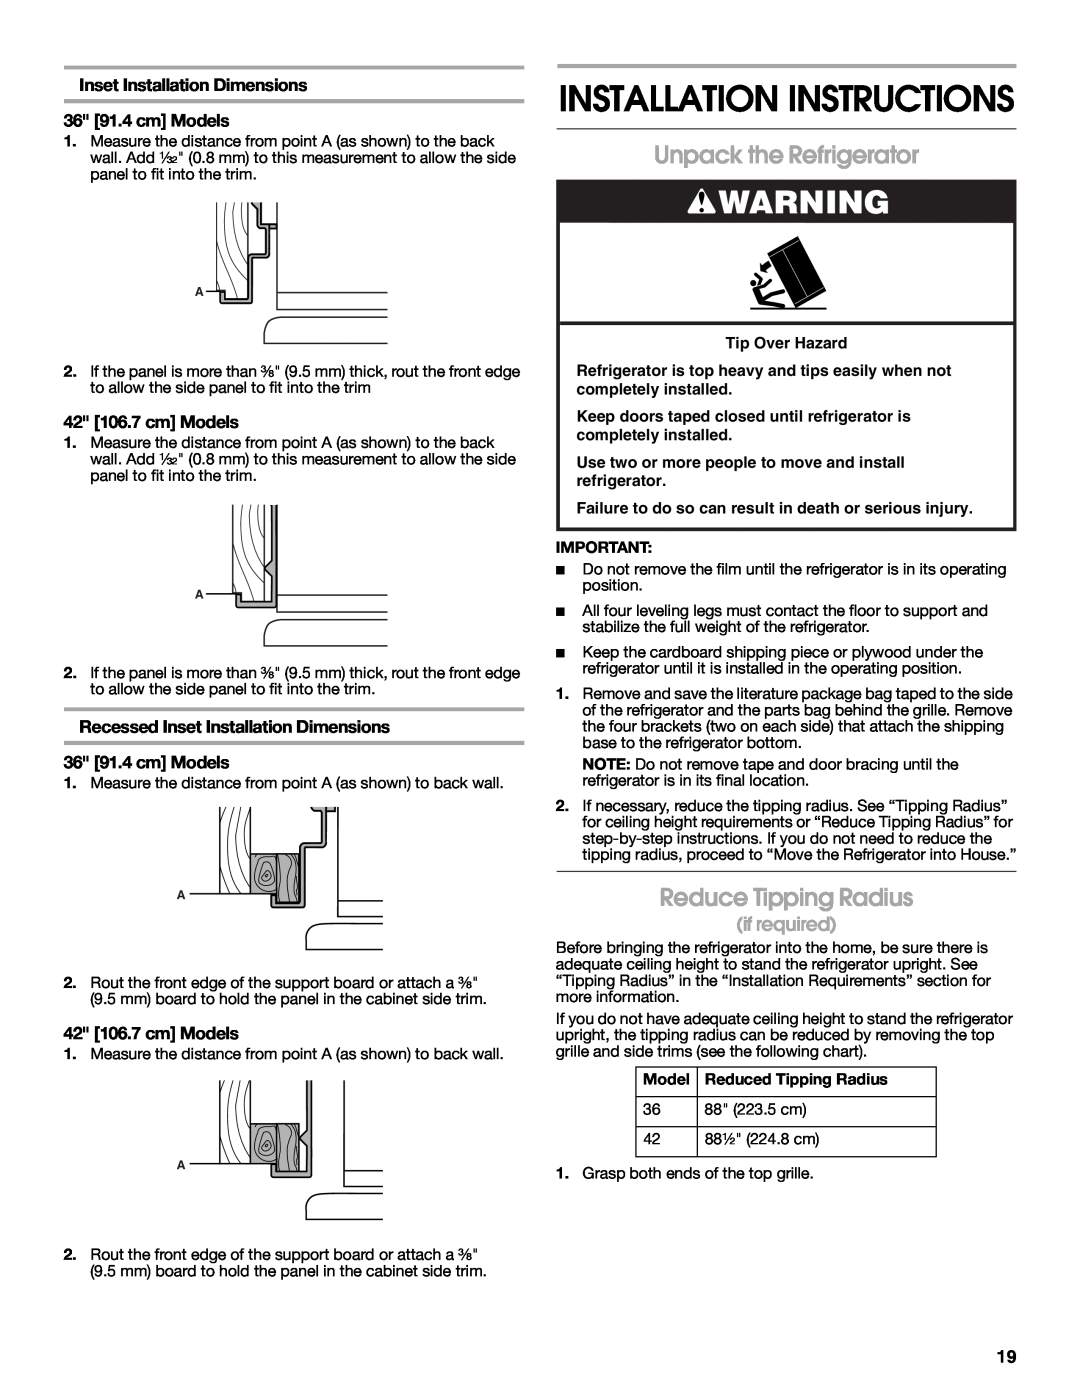 Jenn-Air W10183782A manual Unpack the Refrigerator, Reduce Tipping Radius, if required, Model Reduced Tipping Radius 